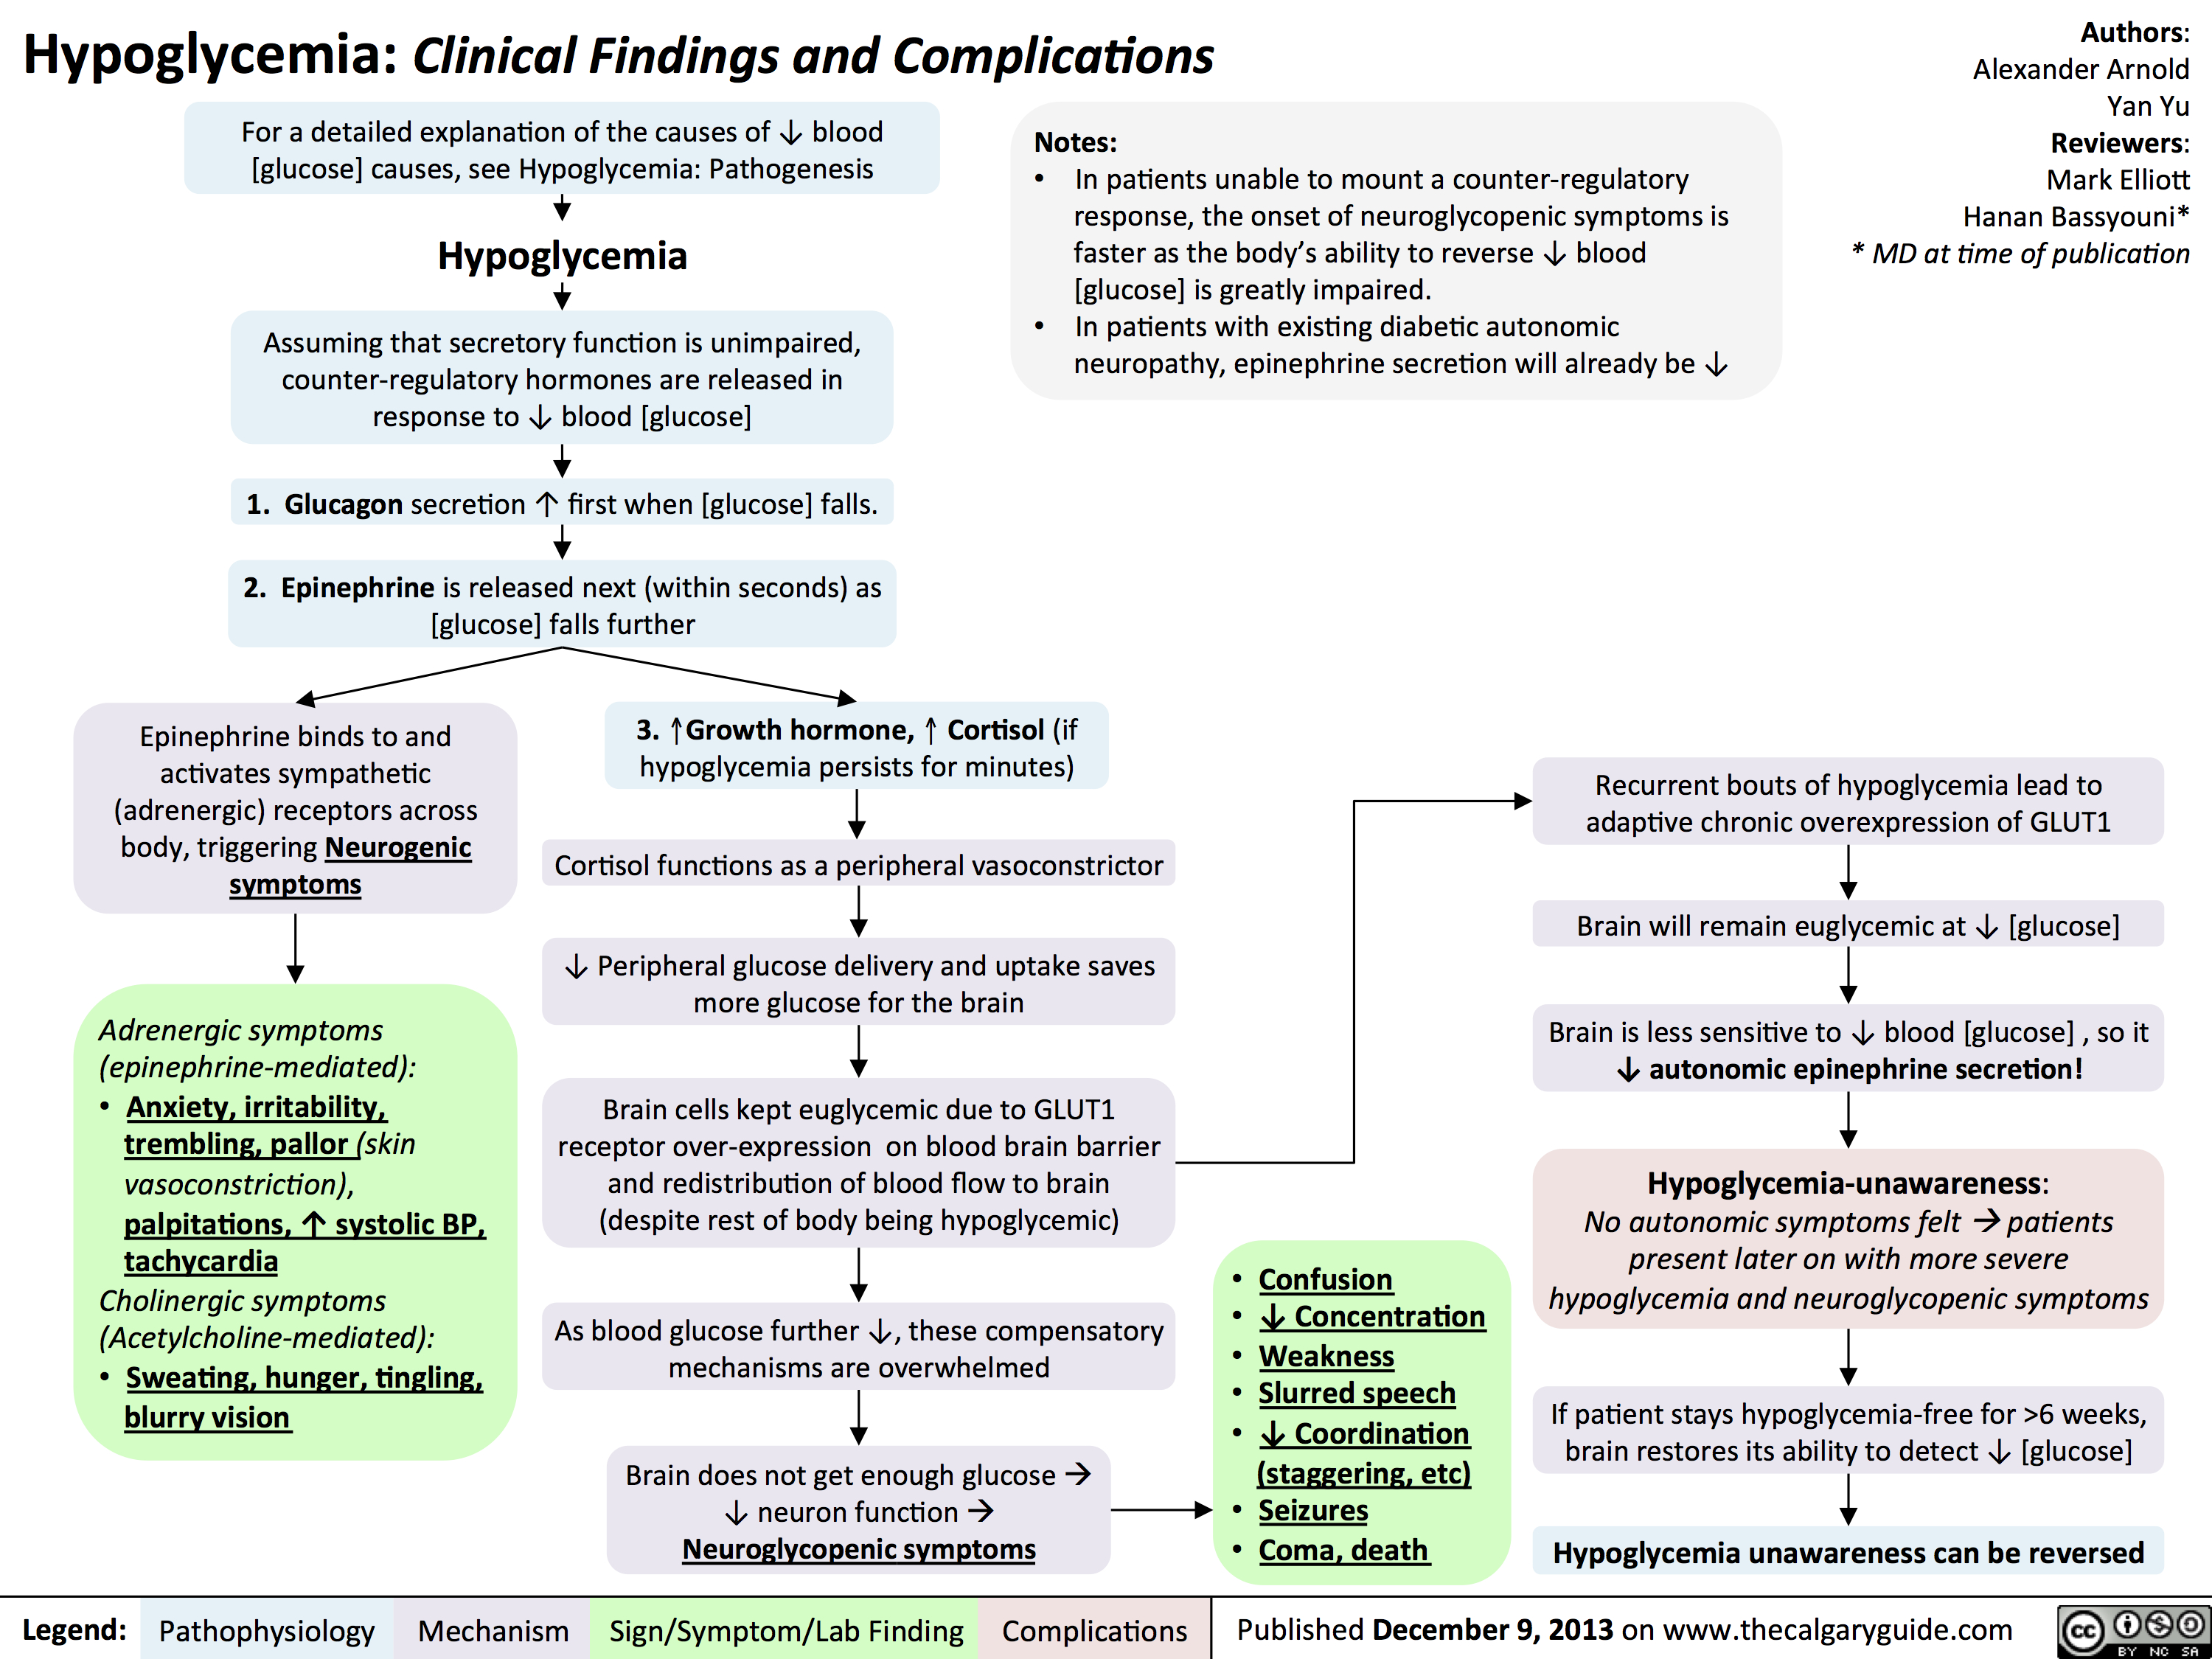 Hypoglycemia - Clinical Findings and Complications